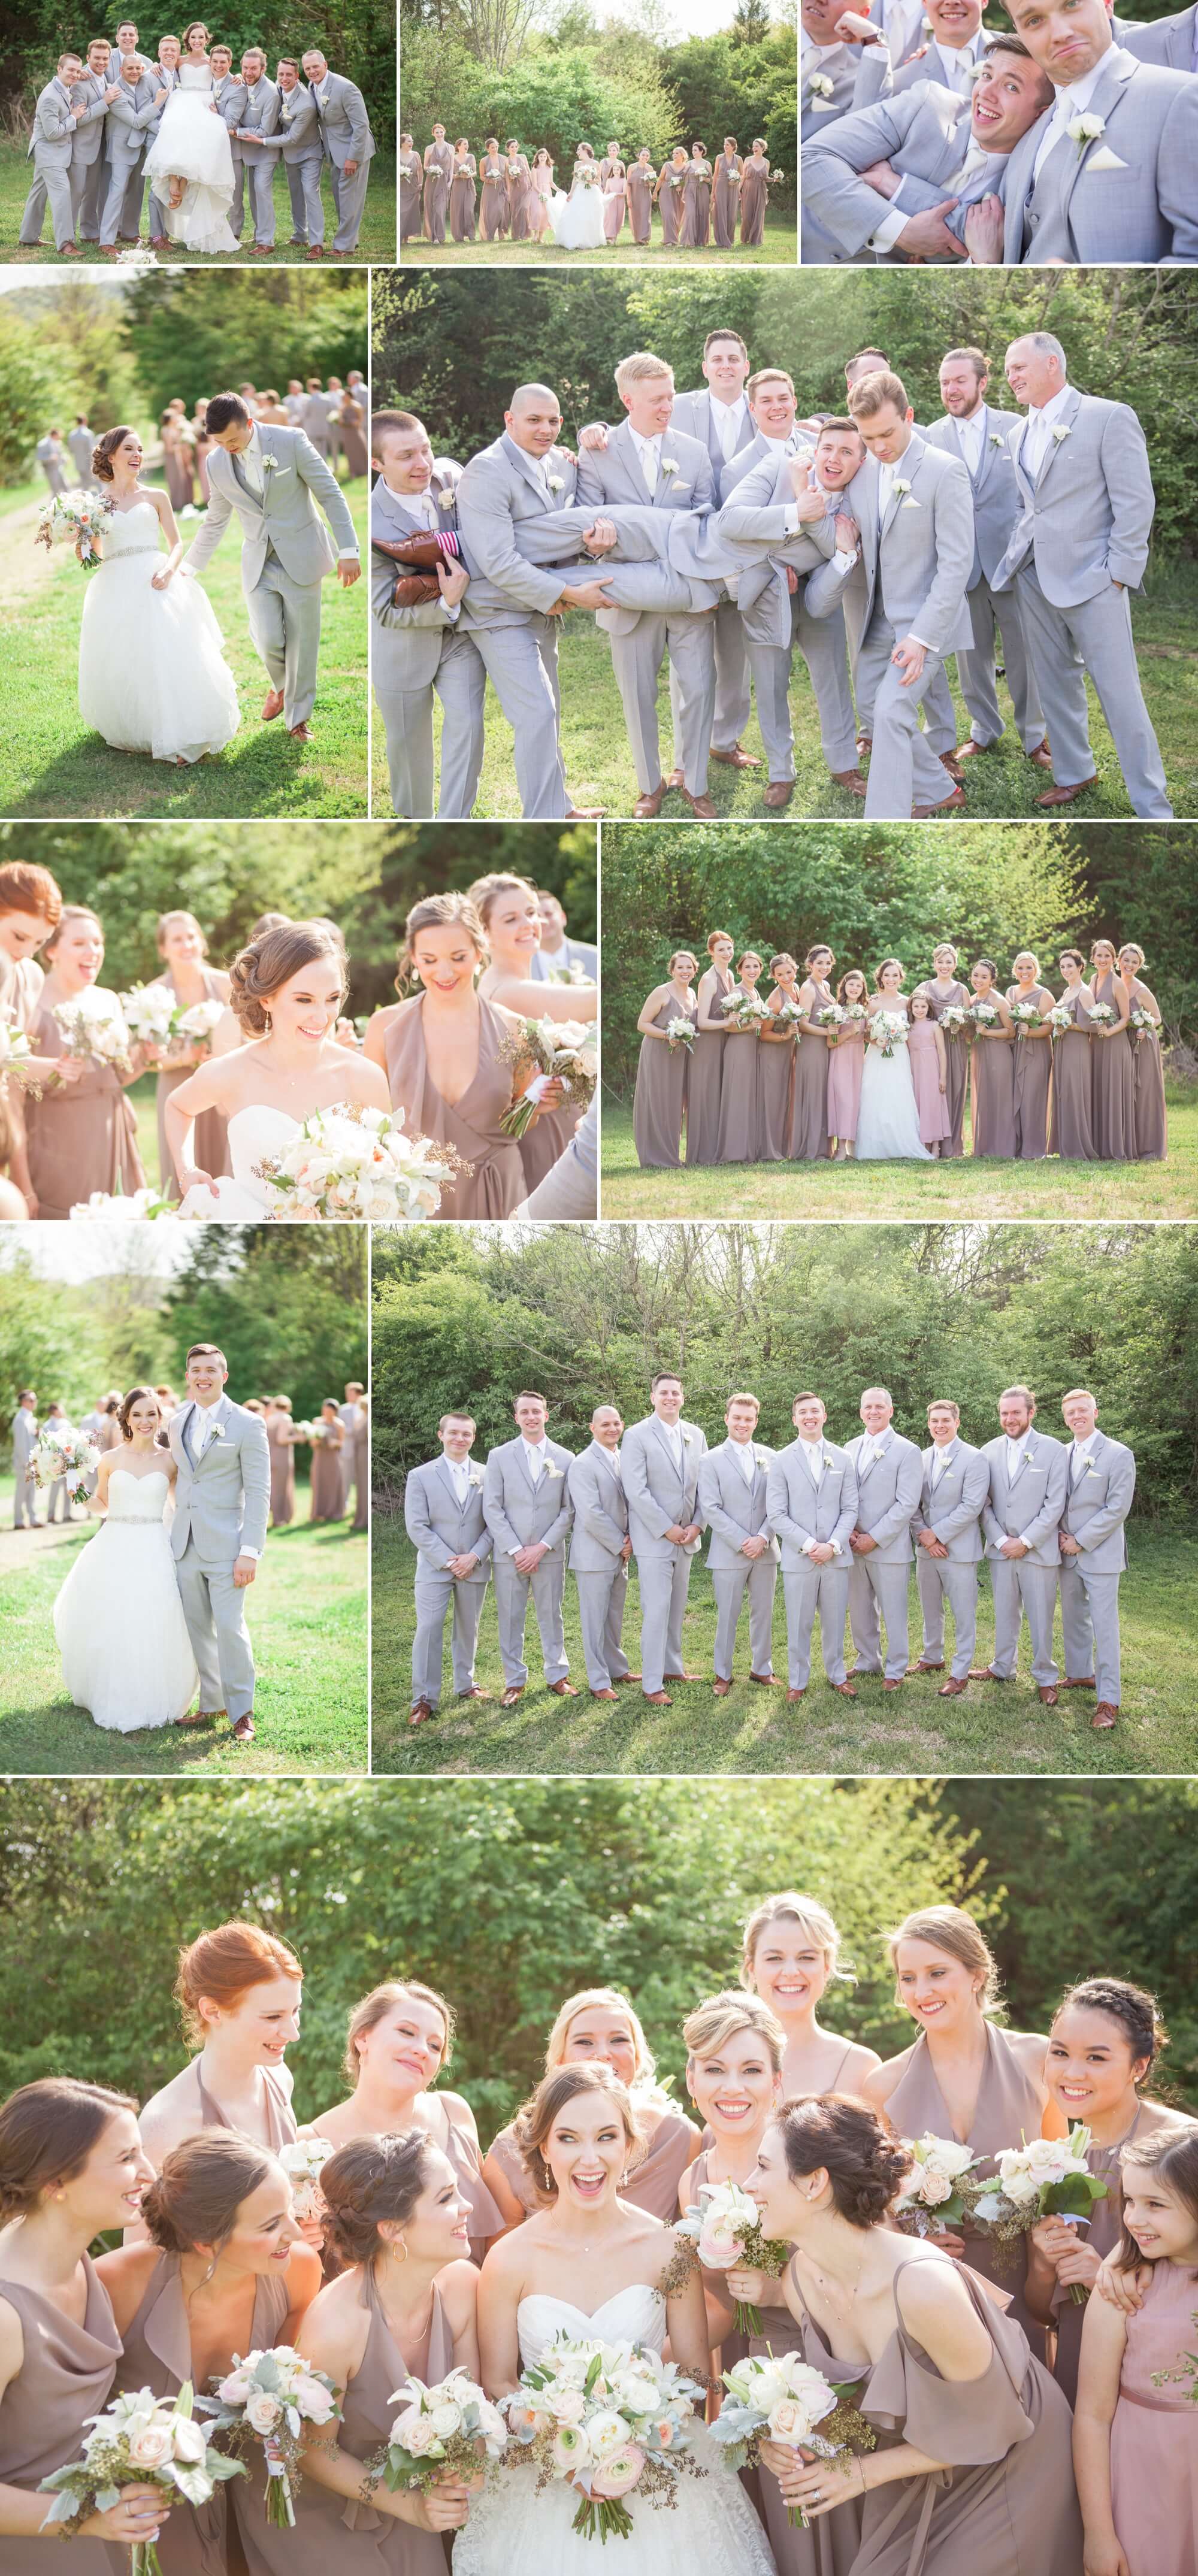 Bridal party photos before ceremony. Spring wedding at Cedarwood Weddings in Nashville, TN. Photo by Krista Lee Photography, from Sam and Izzy's wedding day.